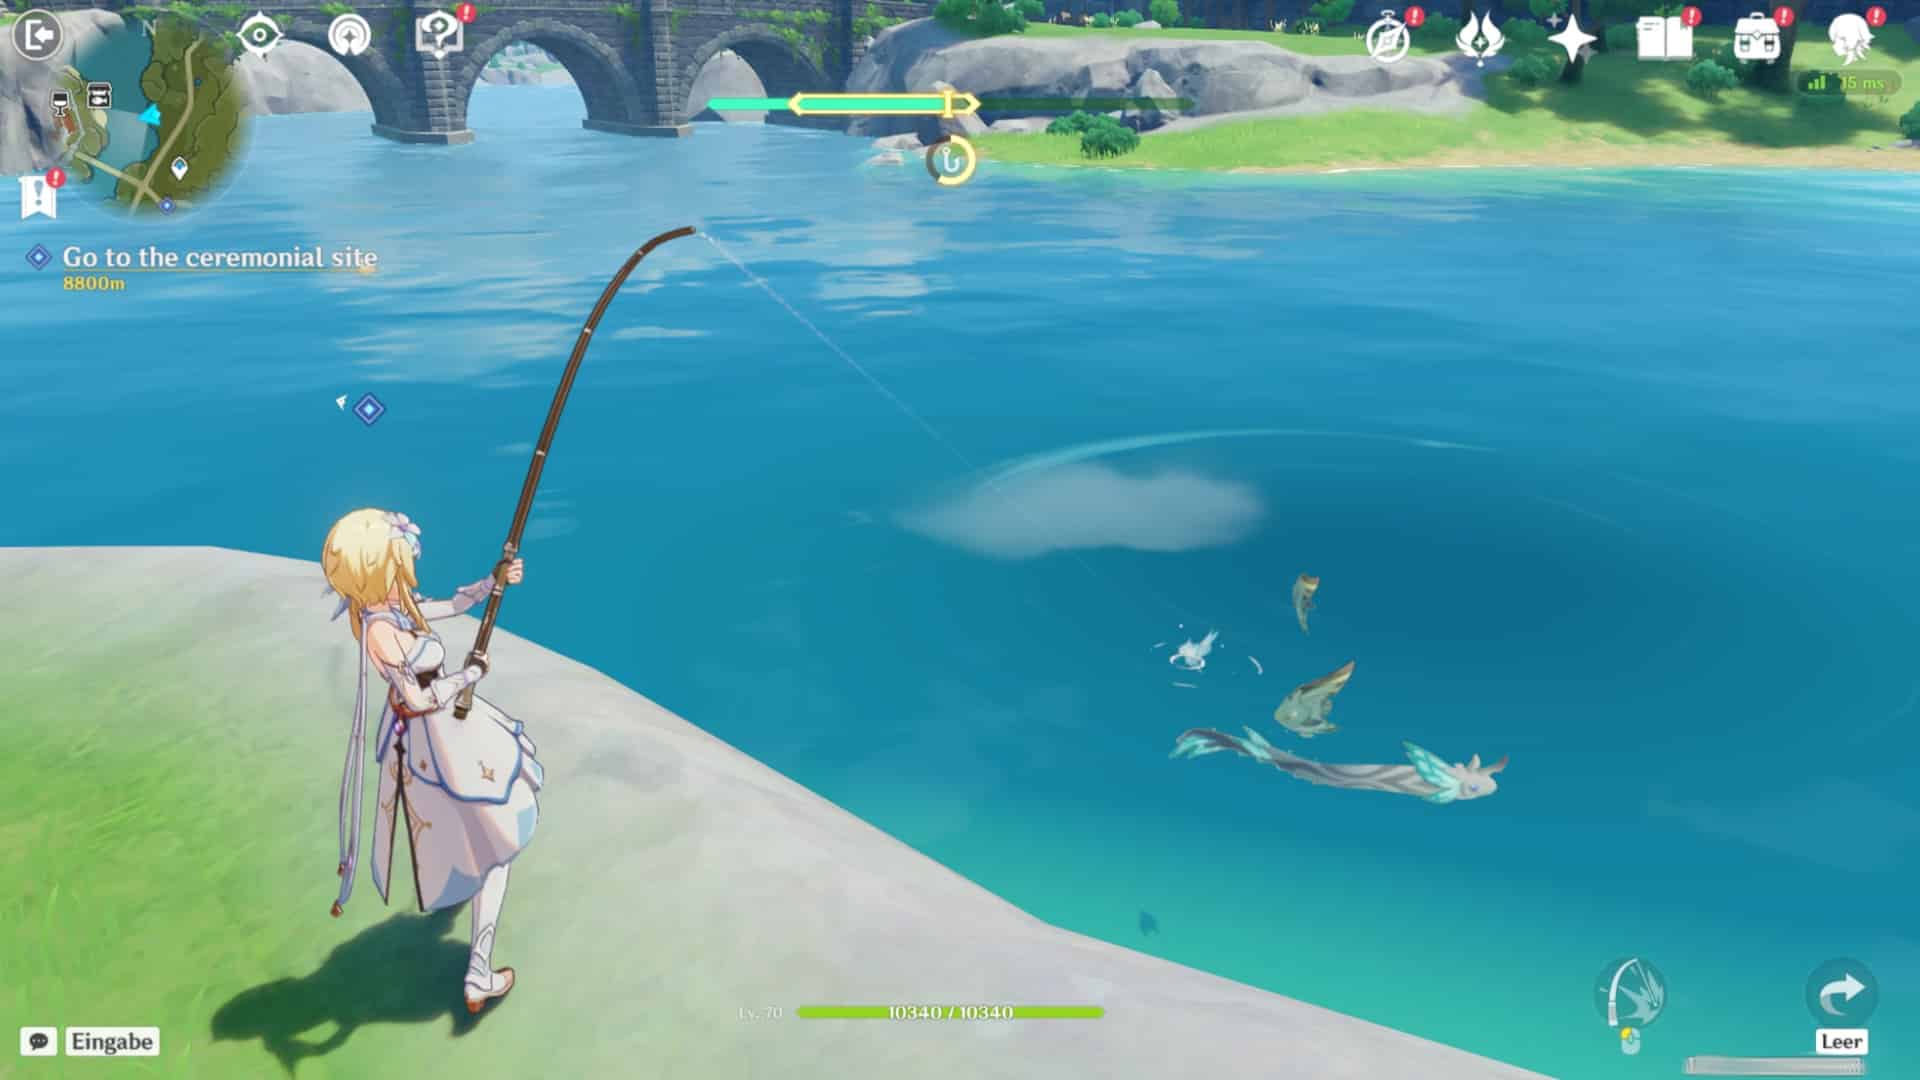 (Similar to other fishing mini-games, you must click to keep the green bar within the yellow frame)